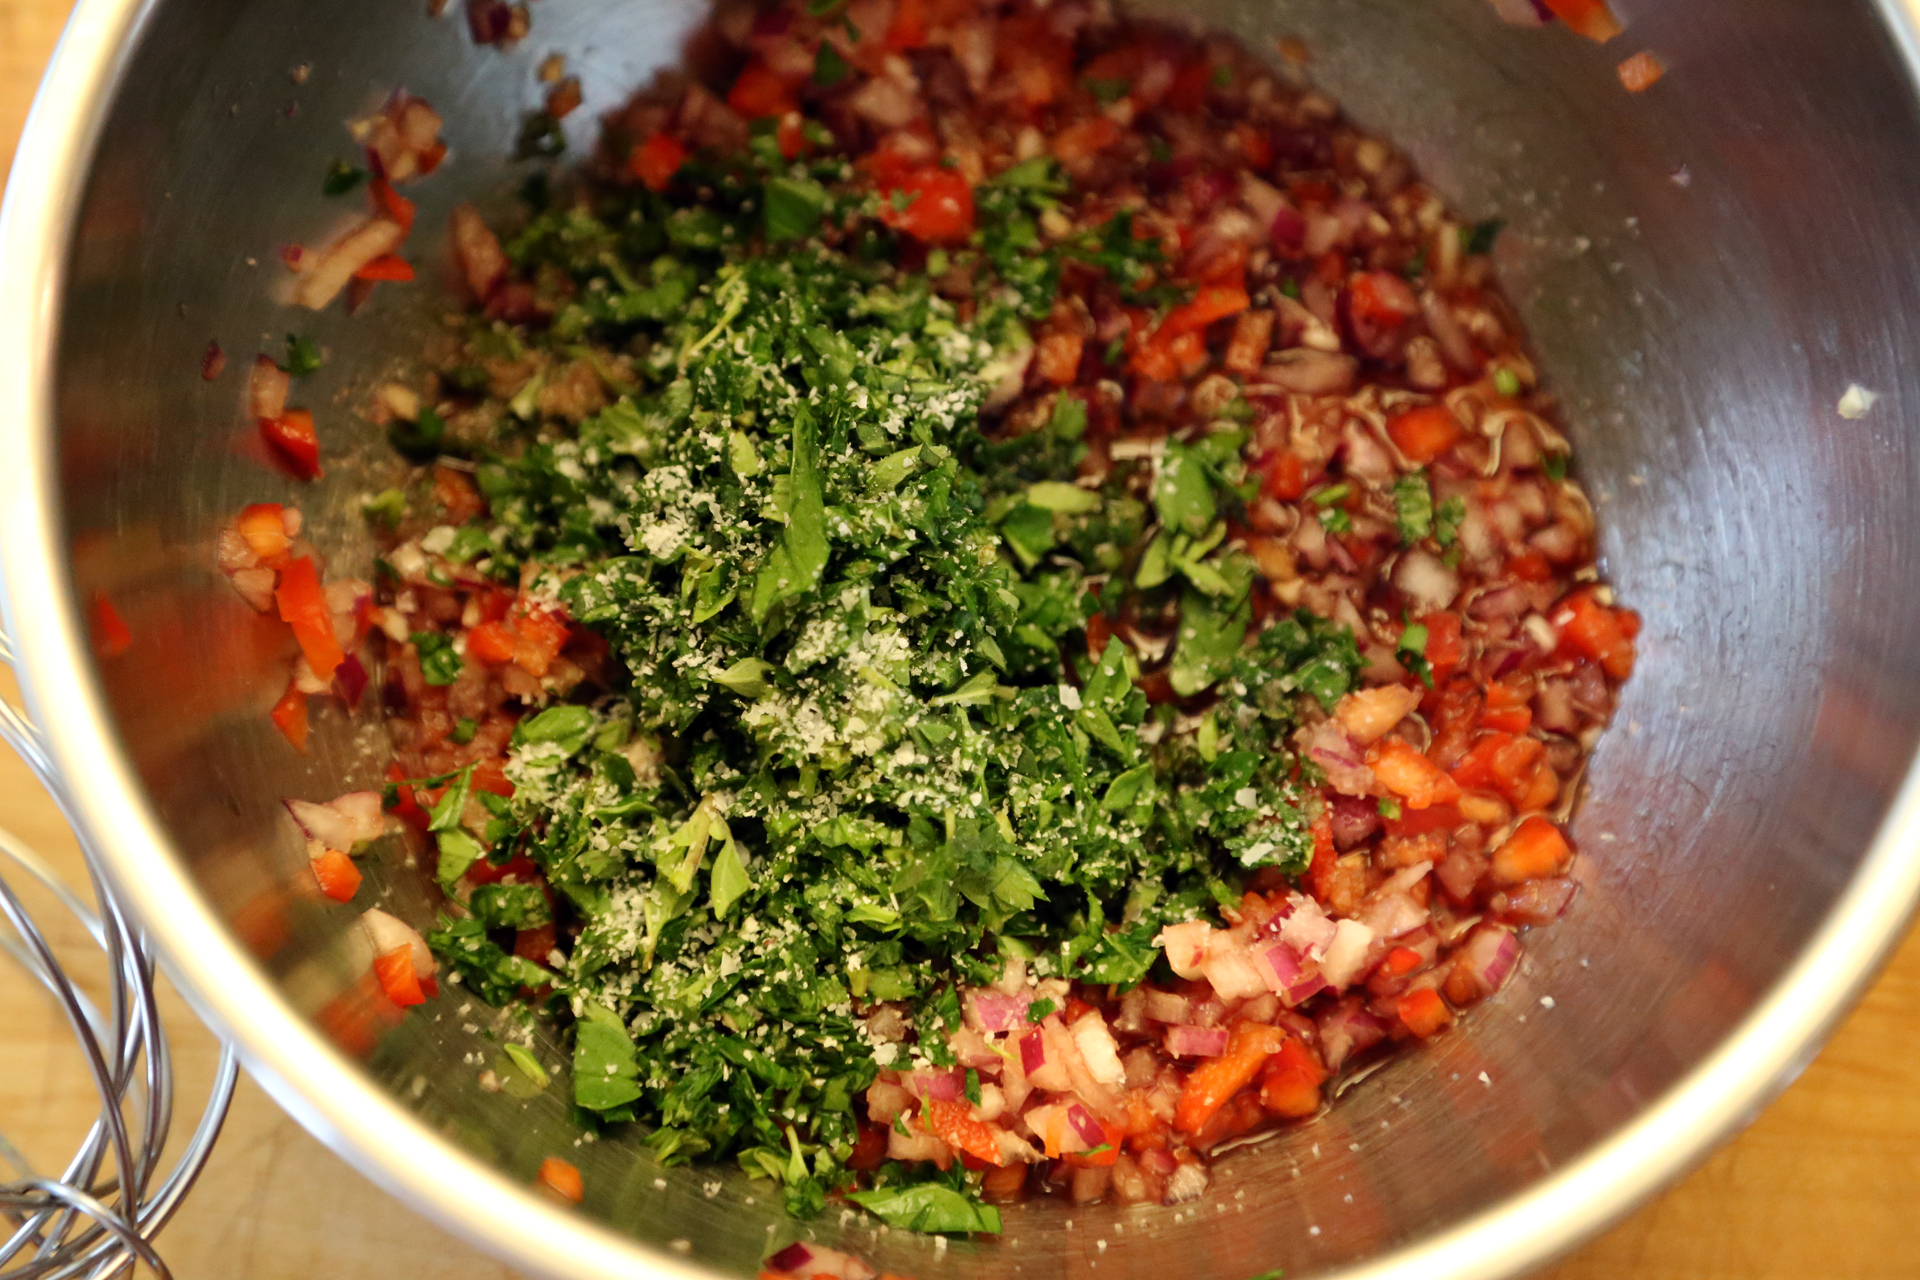 To make the chimichurri, in a mixing bowl, whisk together the vinegar, onion, garlic, bell pepper, parsley, oregano, and red pepper flakes to taste.